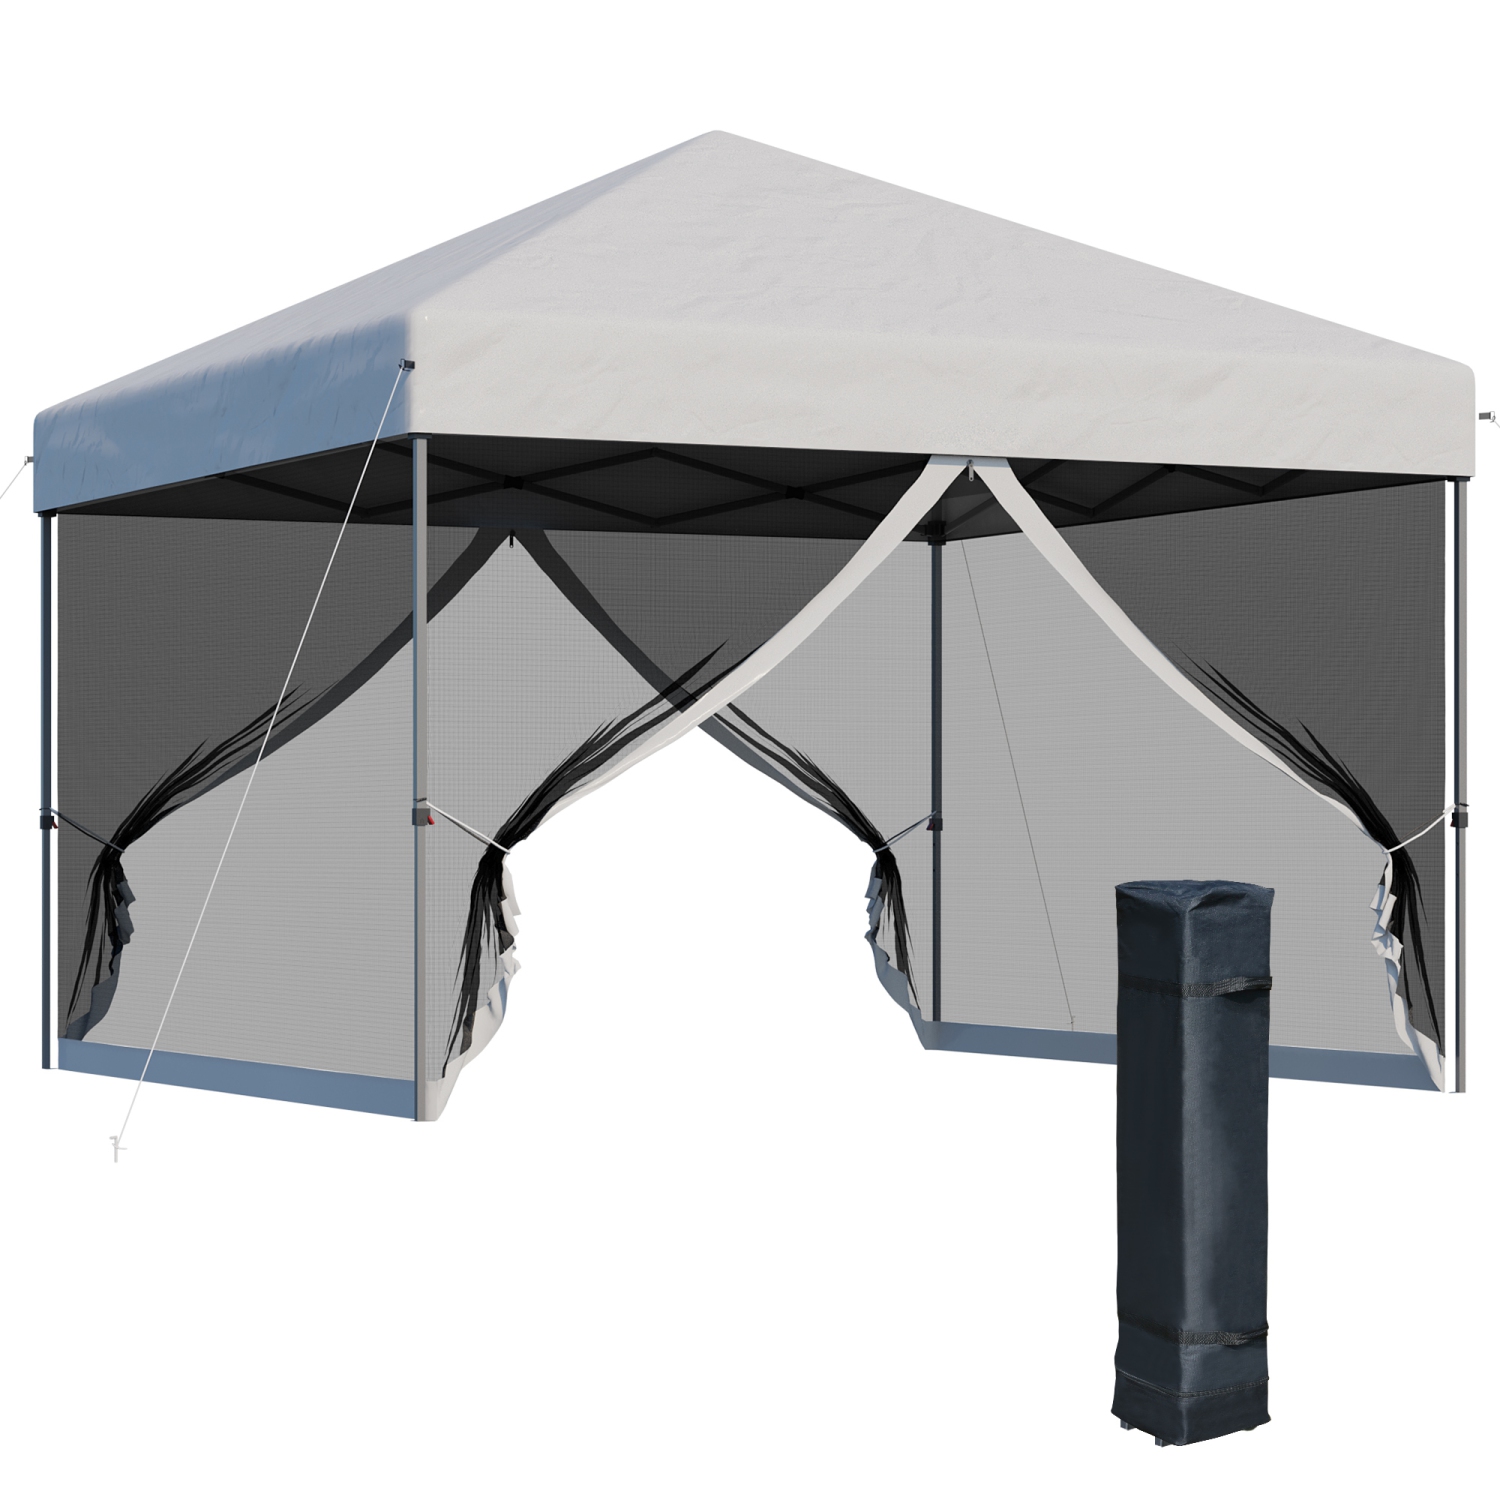 Outsunny 10' x 10' Pop-Up Canopy Tent Outdoor Party Tent with Mesh Sidewalls, 3-Level Adjustable Height, Roller Bag, Silver